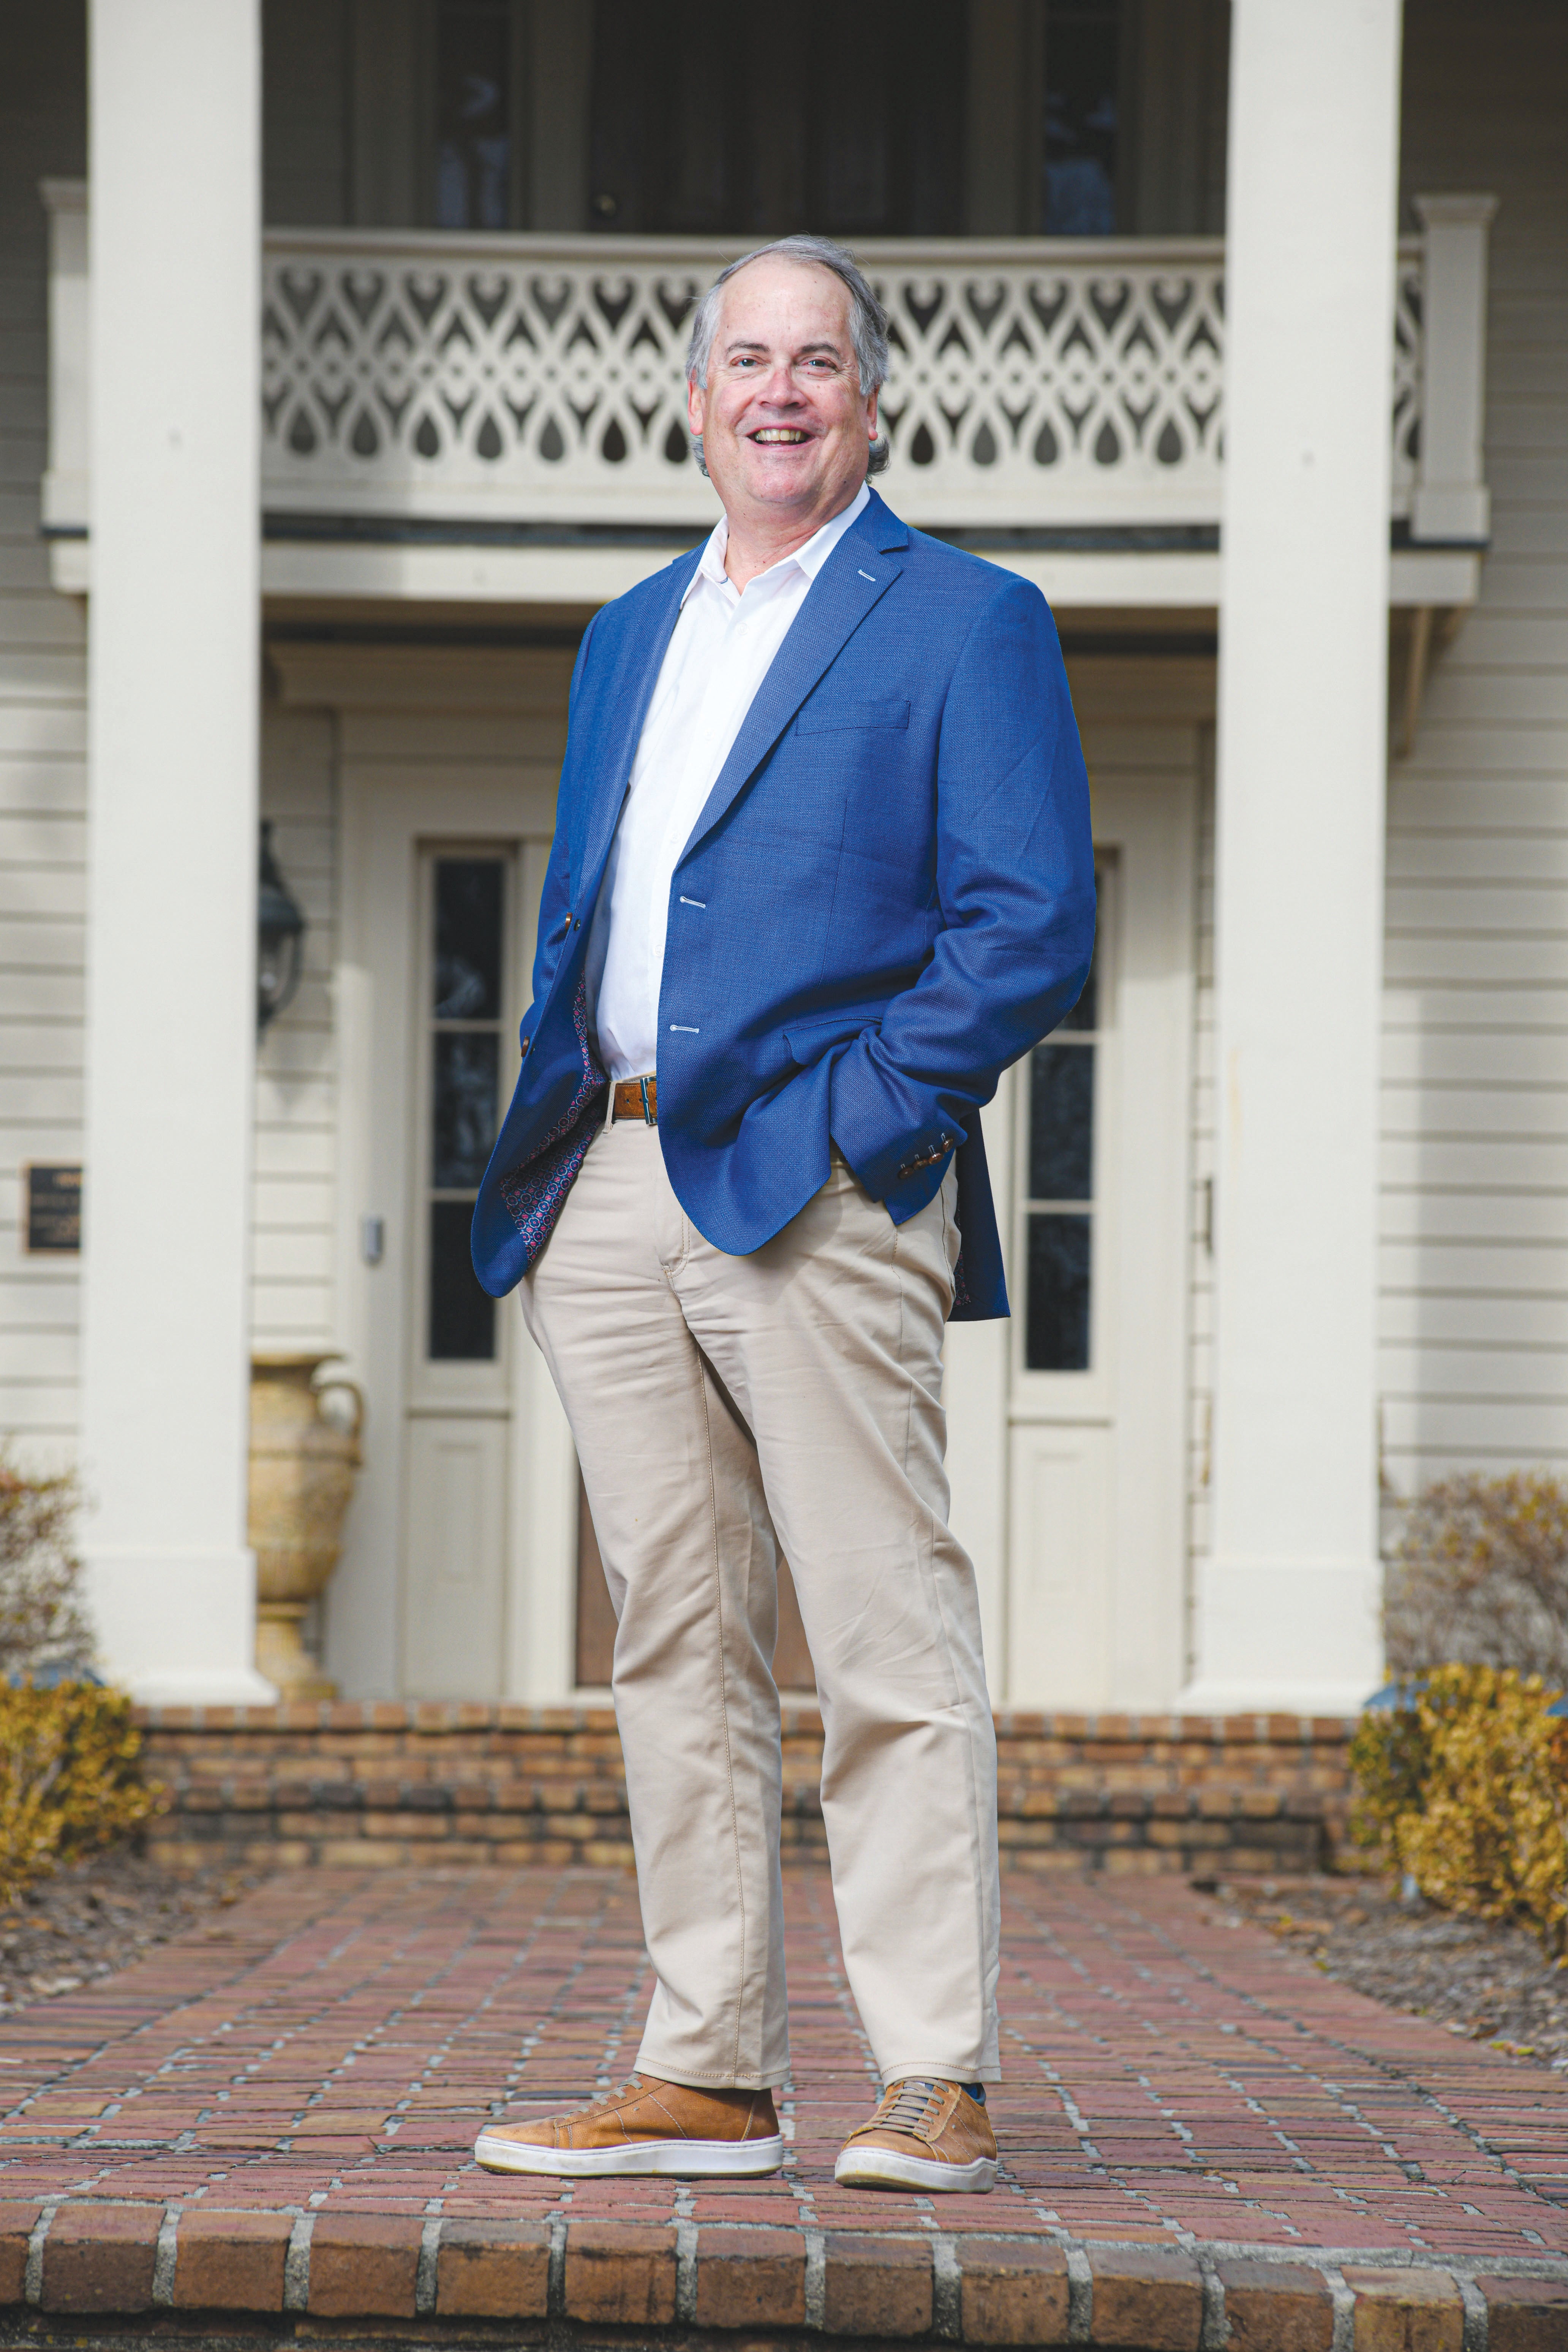 5 Questions with Tim Phillips, Broker Associate, Creye-Leike Oxford Real Estate